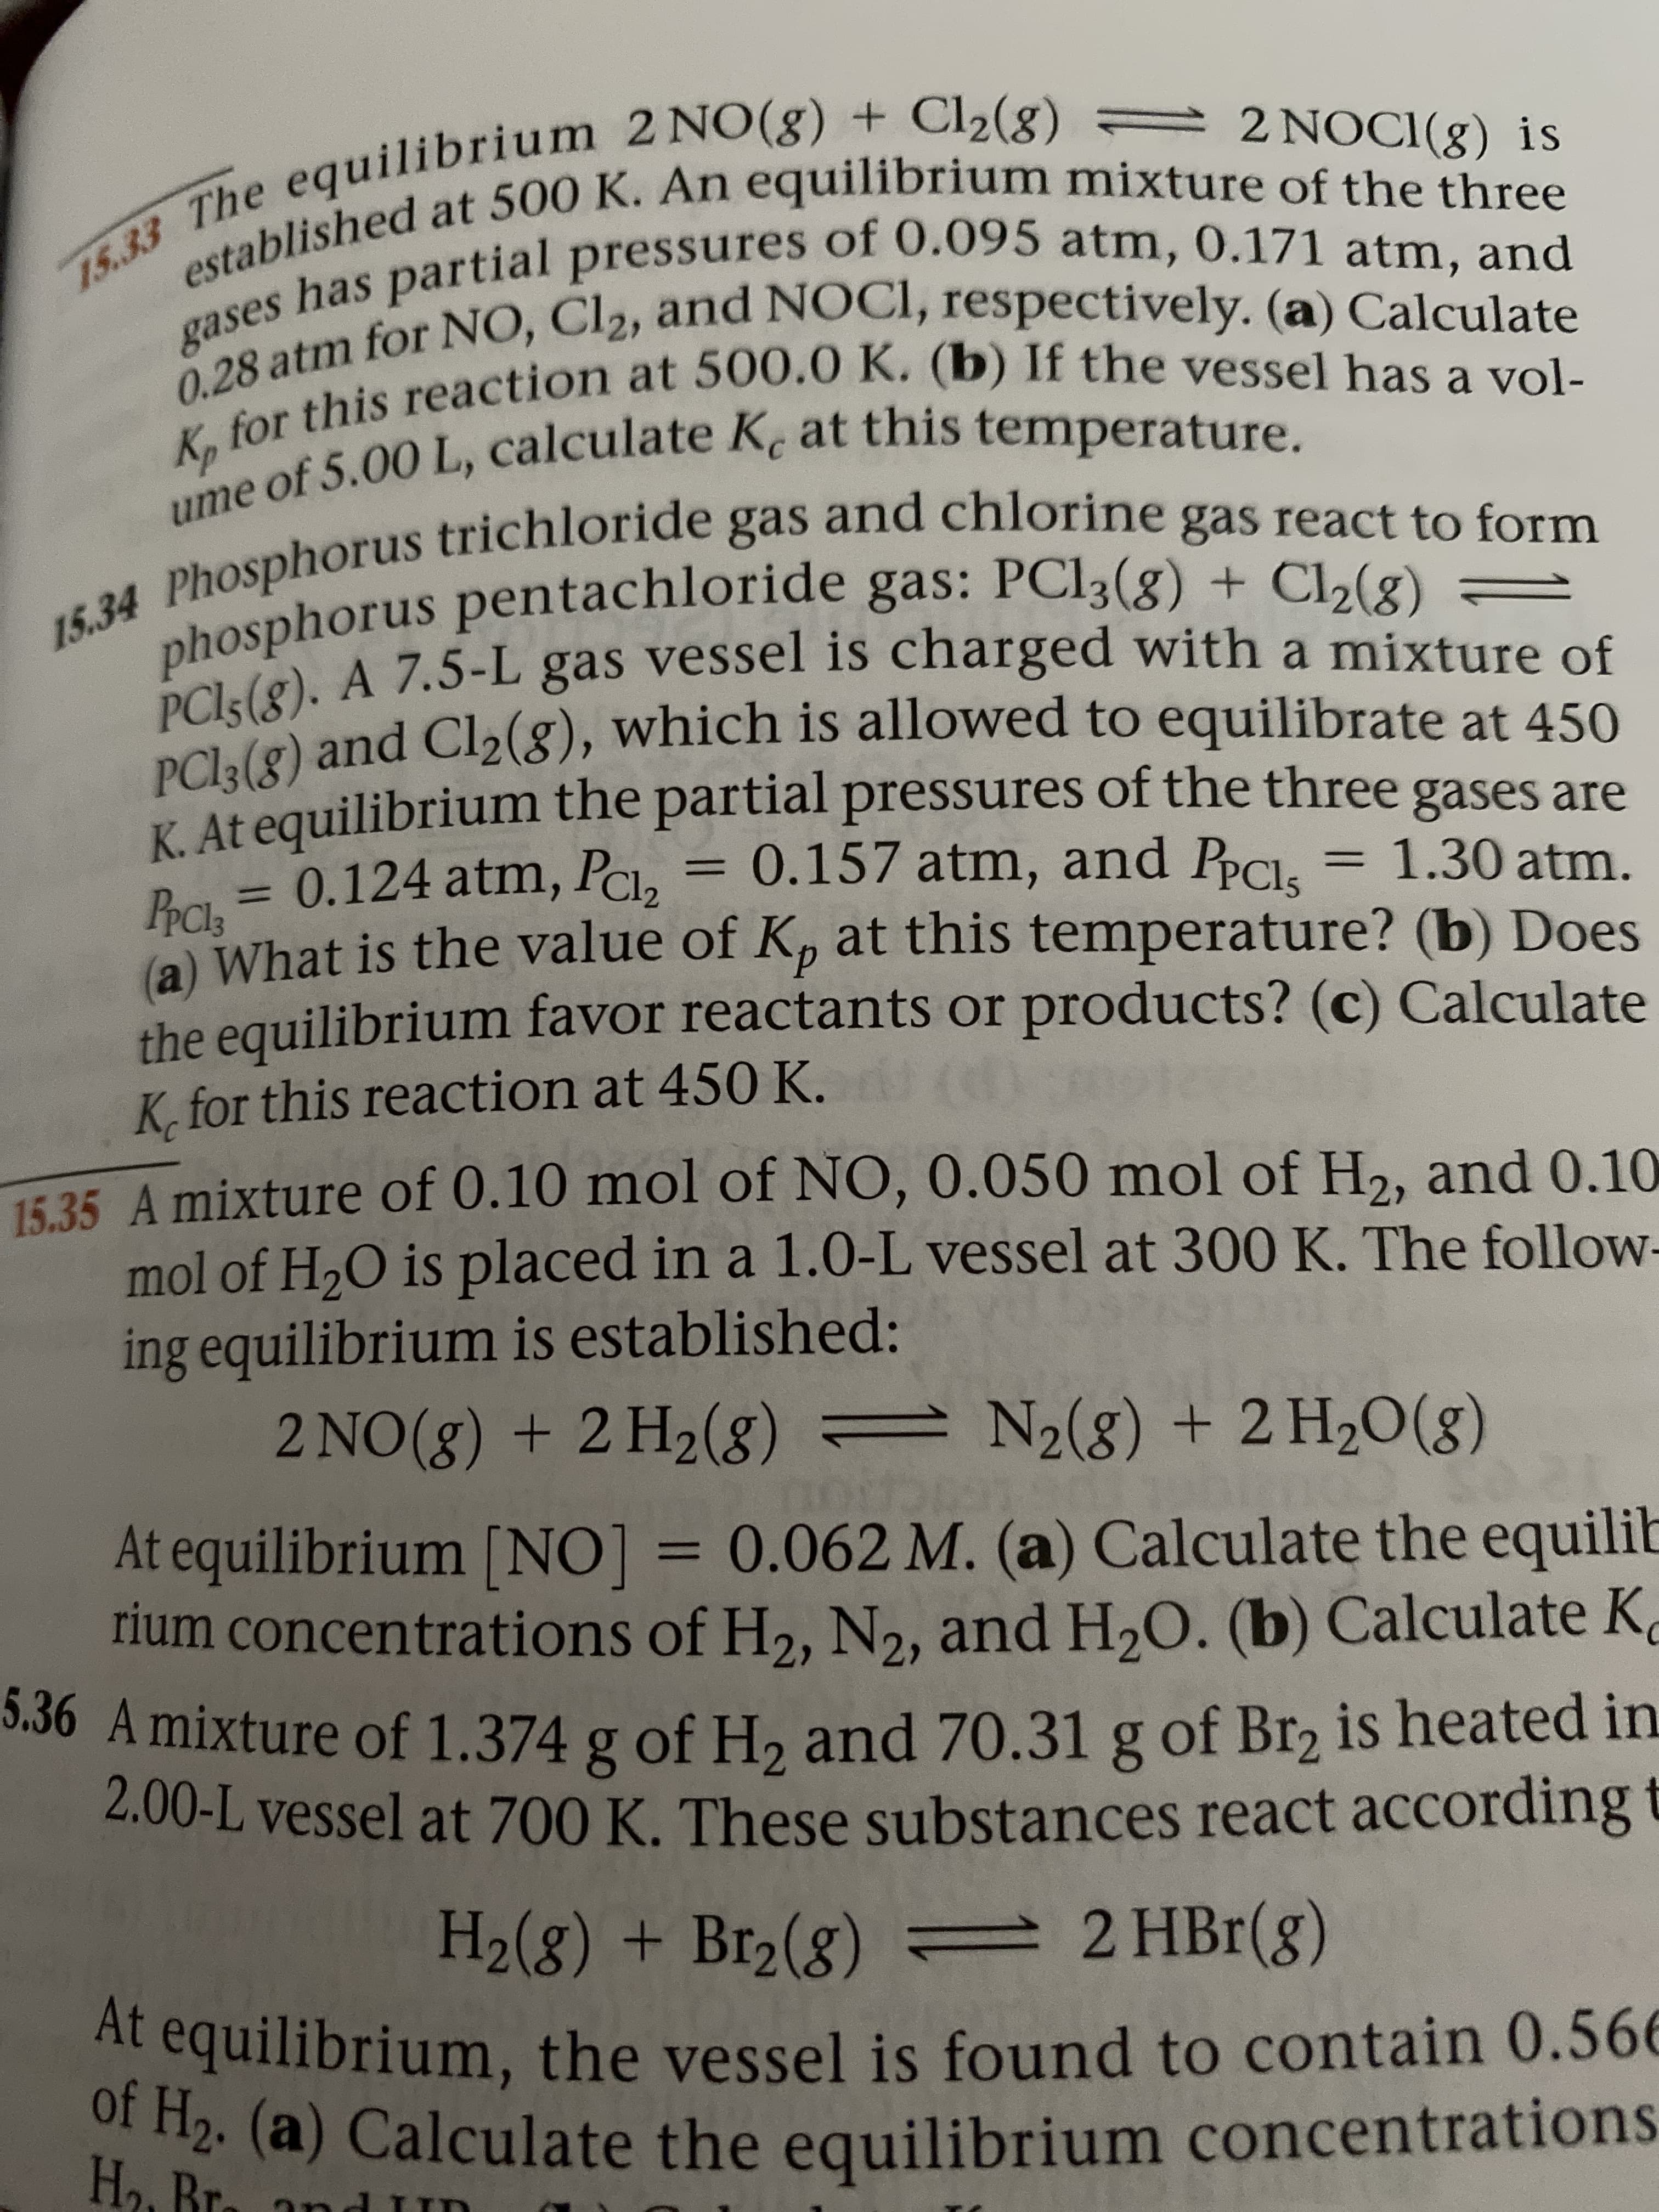 15.33 The equilibrium 2 NO(g) + Cl2(g) = 2NOCI(g) is
established at 500 K. An equilibrium mixture of the three
has partial pressures of 0.095 atm, 0.171 atm, and
gases
for NO, Cl2, and NOCI, respectively. (a) Calculate
,for this reaction at 500.0 K. (b) If the vessel has a vol-
ume of 5.00 L, calculate K. at this temperature.
15.34 Phosphorus trichloride gas and chlorine gas react to form
phosphorus pentachloride gas: PC13(8) + Cl2(8) =
PCI5(8). A 7.5-L gas vessel is charged with a mixture of
PC13(8) and Cl2(g), which is allowed to equilibrate at 450
K At equilibrium the partial pressures of the three gases are
0.124 atm, PcI,
= 0.157 atm, and PPCI
1.30 atm.
%3D
PPCI3
a) What is the value of K, at this temperature? (b) Does
%3D
d.
the equilibrium favor reactants or products? (c) Calculate
K, for this reaction at 450 K.
15.35 A mixture of 0.10 mol of NO, 0.050 mol of H,, and 0.10
mol of H,O is placed in a 1.0-L vessel at 300 K. The follow-
ing equilibrium is established:
2 NO(8) + 2 H2(8) = N2(g) + 2 H2O(g)
At equilibrium [NO] = 0.062 M. (a) Calculate the equilib
rium concentrations of H2, N2, and H,O. (b) Calculate K
5.36 A mixture of 1.374 g of H, and 70.31 g
2.00-L vessel at 700 K. These substances react according t
%D
of Br, is heated in
H2(8) + Br2(g)
2 HBr(g)
At equilibrium, the vessel is found to contain 0.56E
Of H2. (a) Calculate the equilibrium concentrations
H2. Br.
